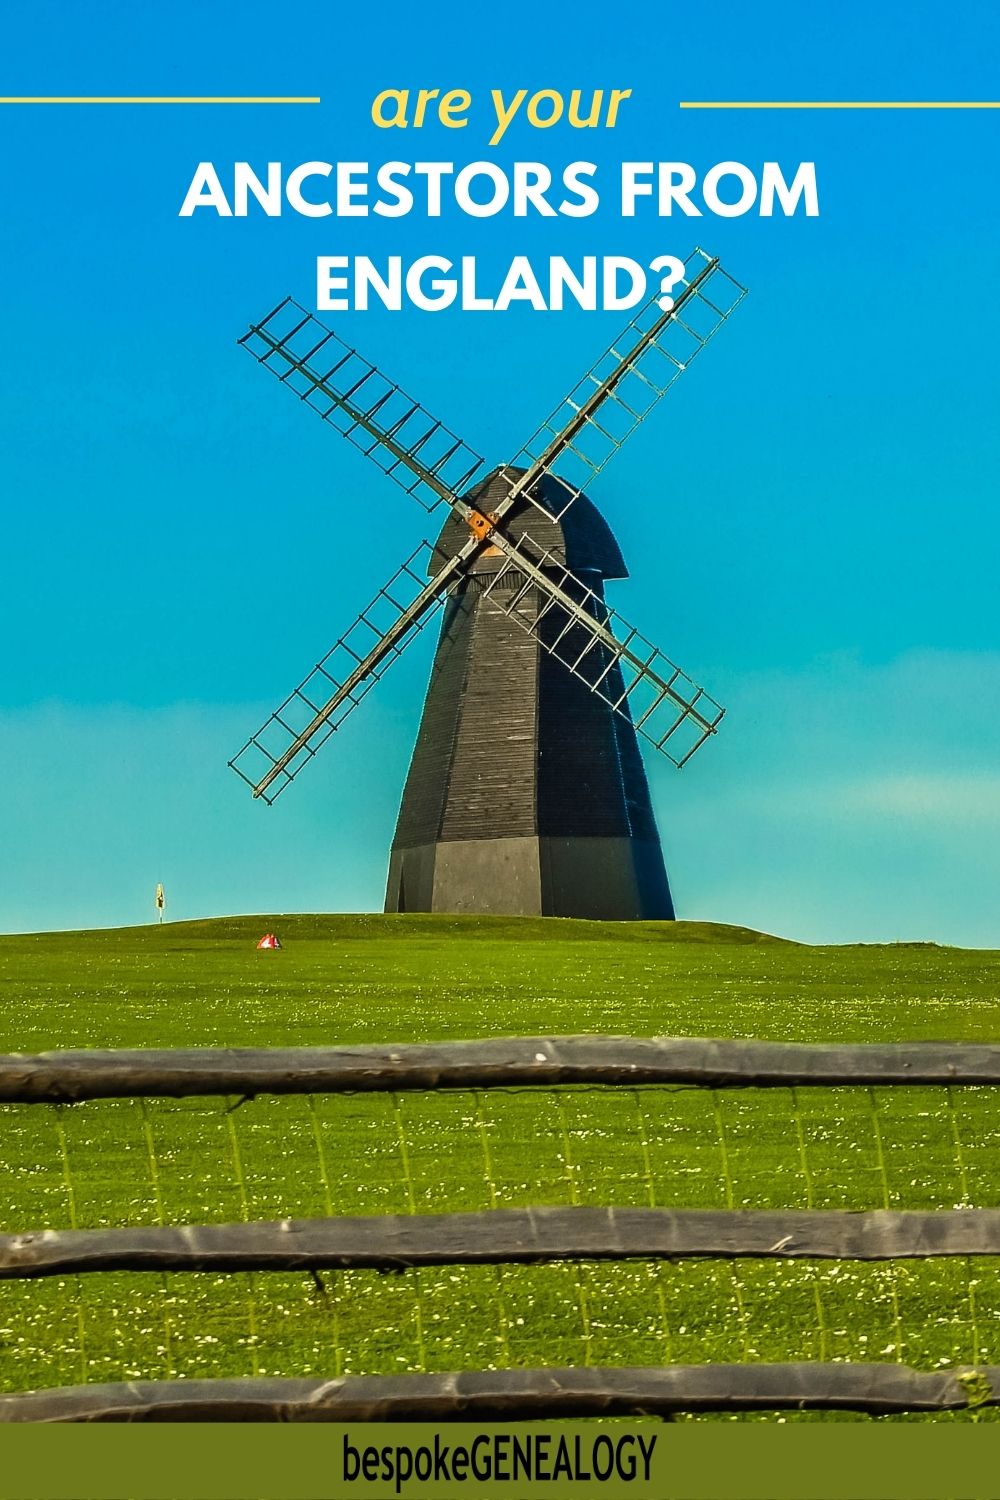 Are your ancestors from England? Photo of an English windmill on a hill.